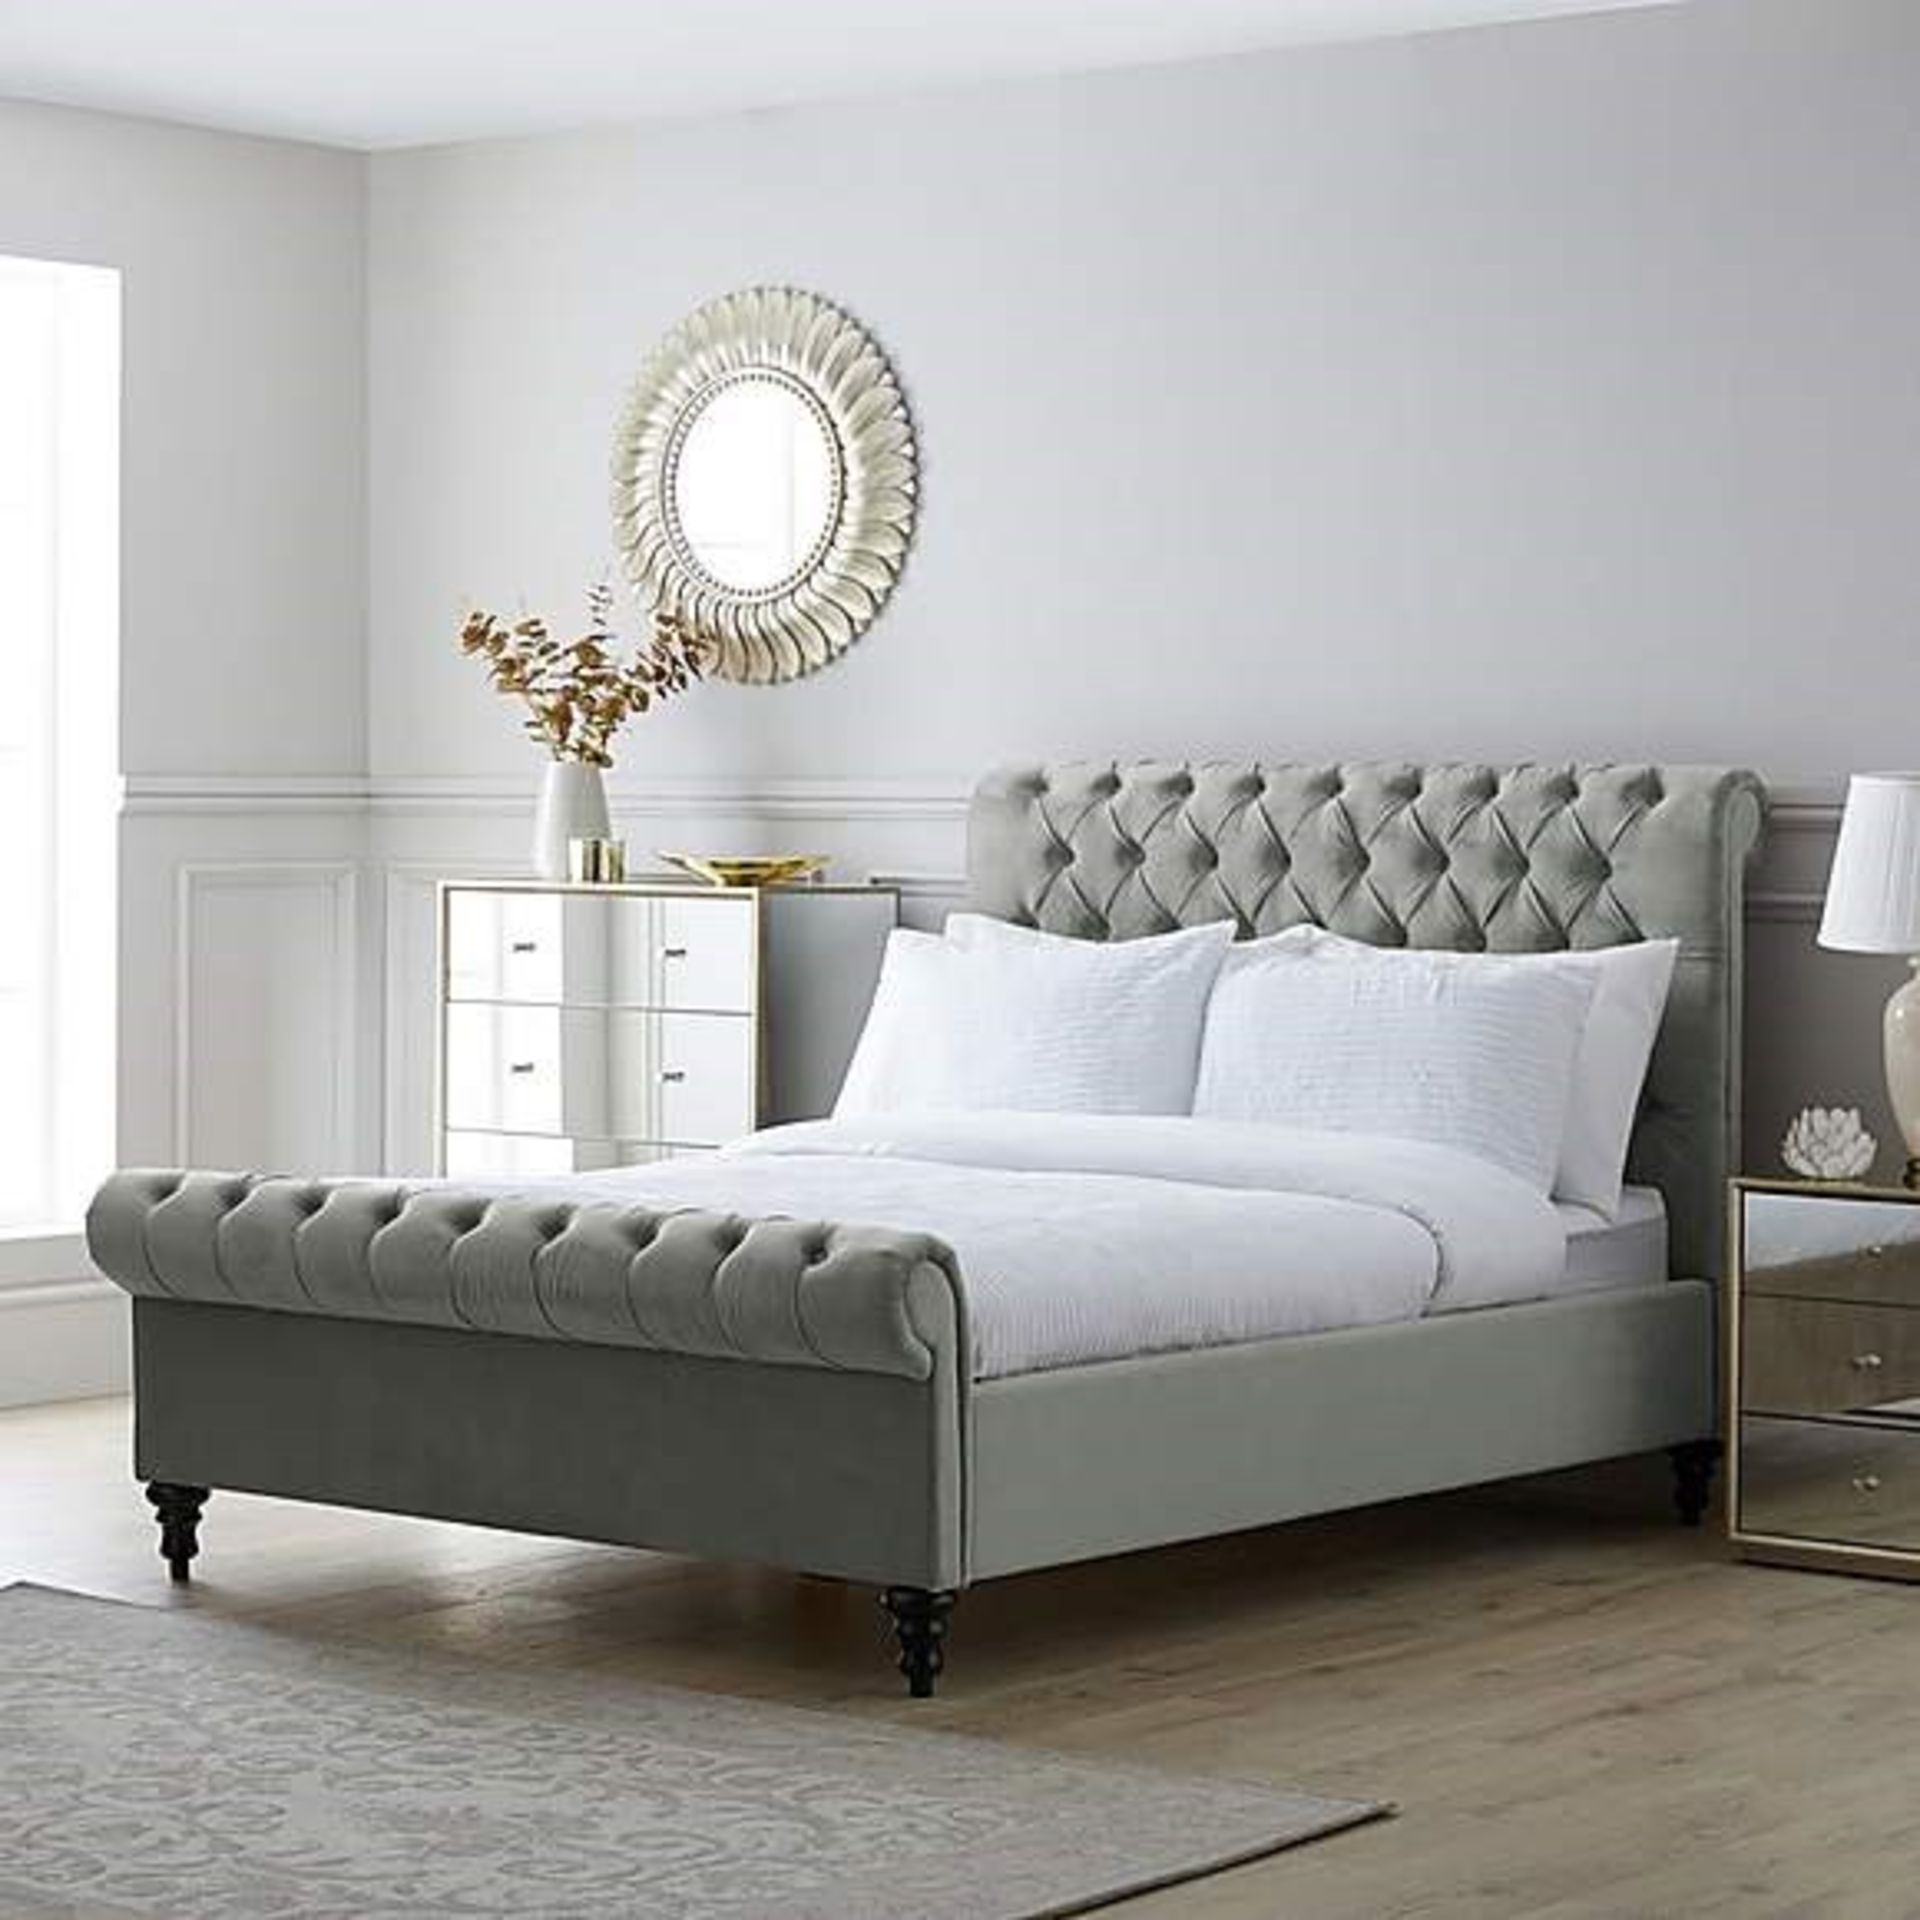 Super King Velvet Bed Frame Inspired by the iconic chesterfield style, this luxurious bedframe